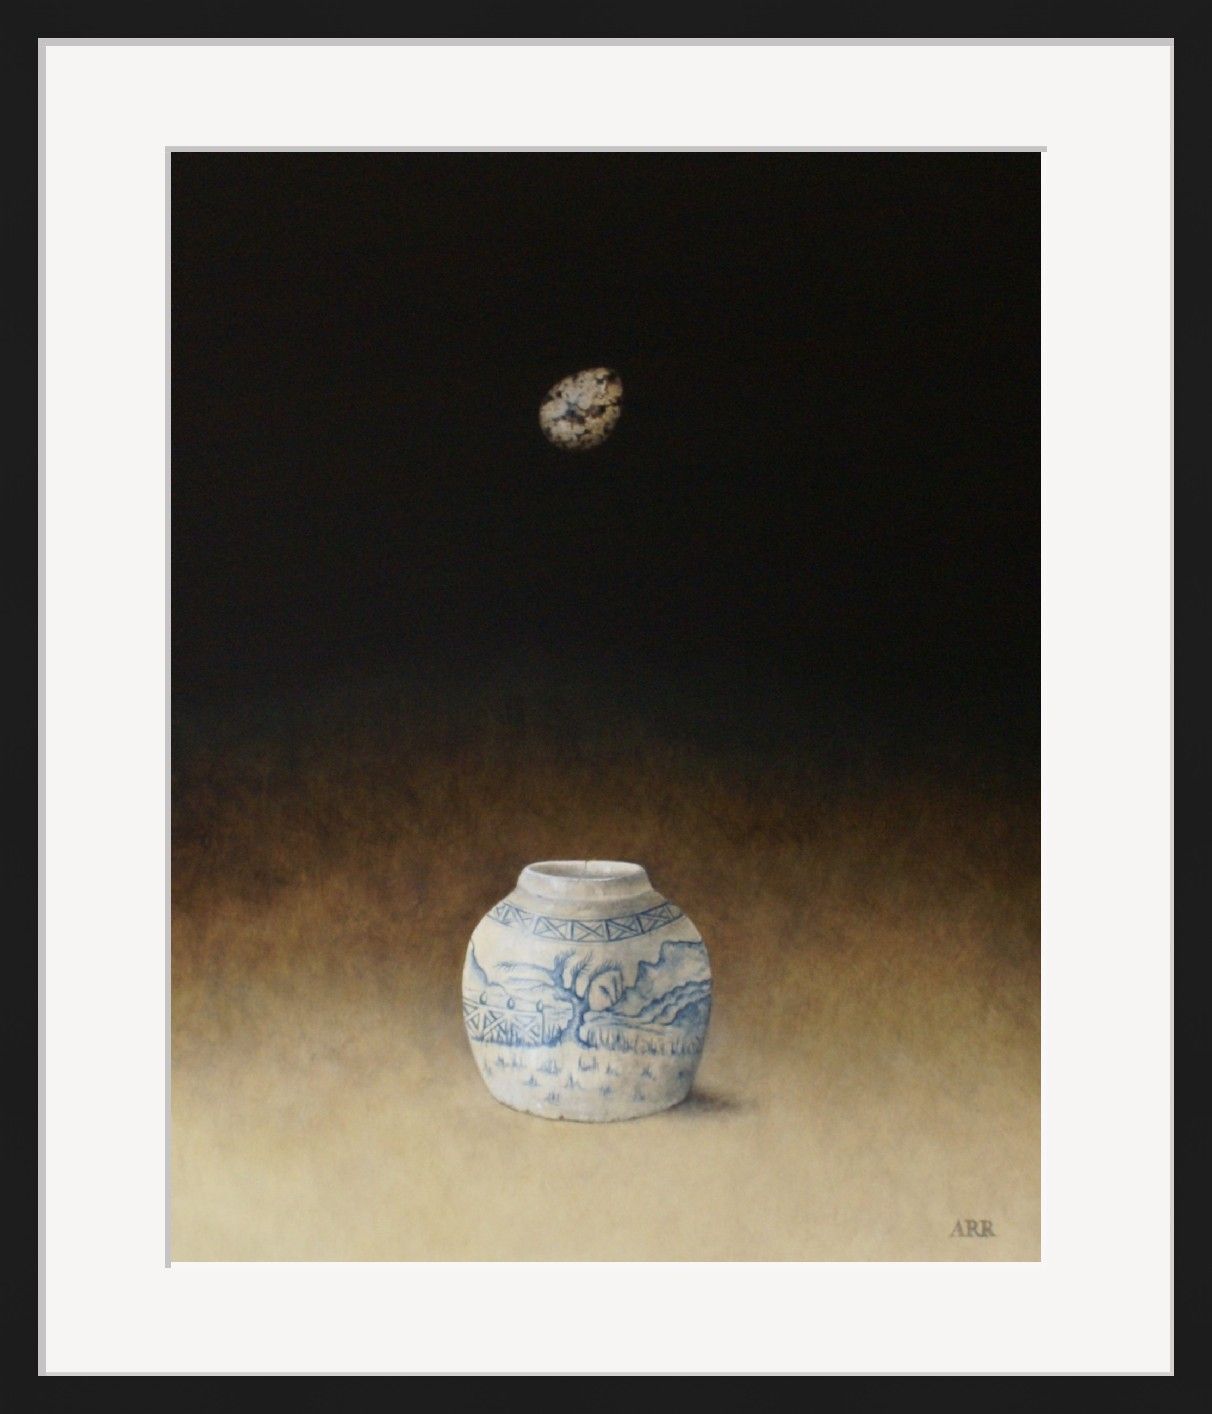 Chinese Jar with Falling Quails Egg by Alison Rankin